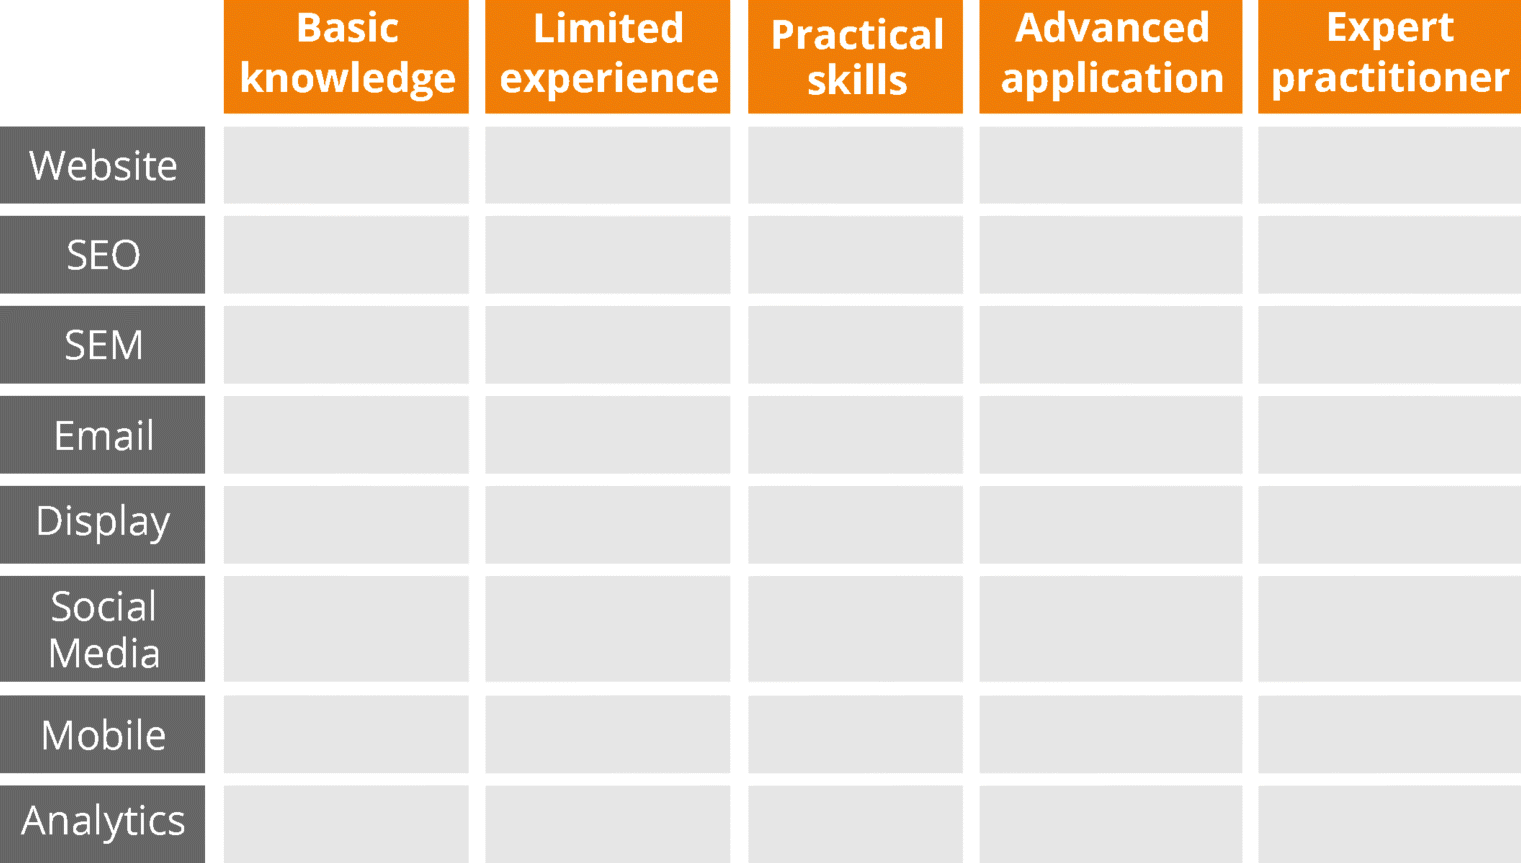 Figure depicting situation analysis chart presented in a tabular form consisting of five columns and eight rows. Starting from left to right the columns indicate basic knowledge, limited experience, practical skills, advanced application, and expert practitioner. From top to bottom the row heads indicate website, SEO, SEM, Email, display, social media, mobile, and analytics